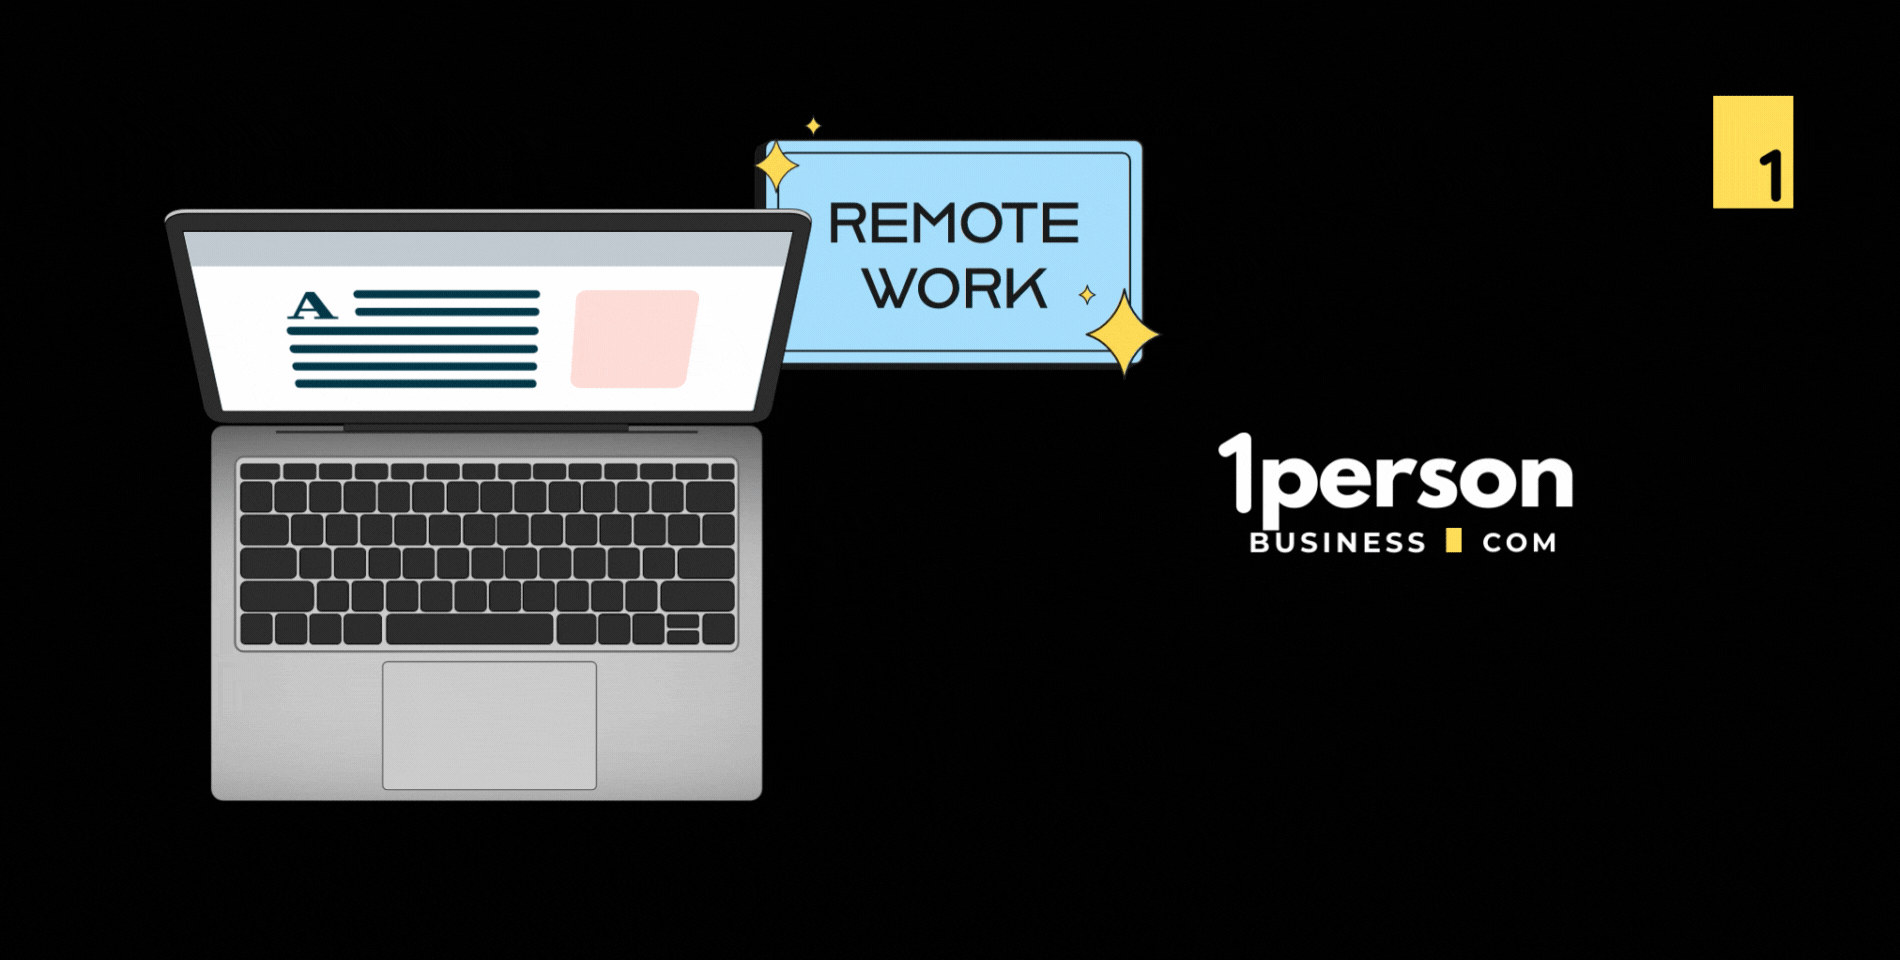 Making the most of remote work as a one-person business